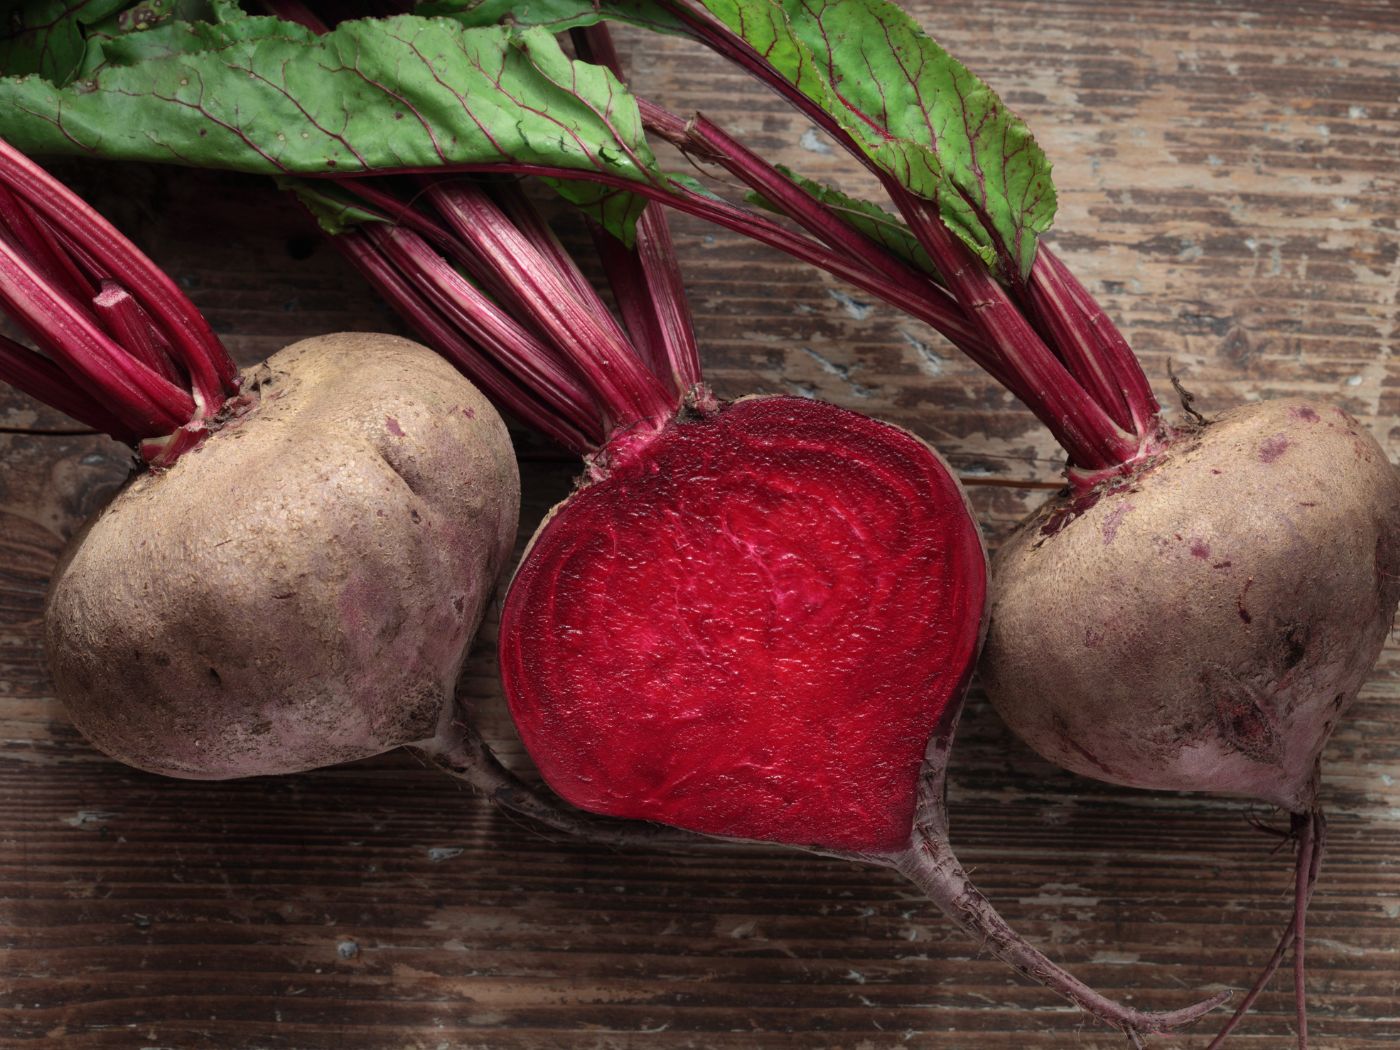 Beetroot: Health Benefits & Nutritional Facts